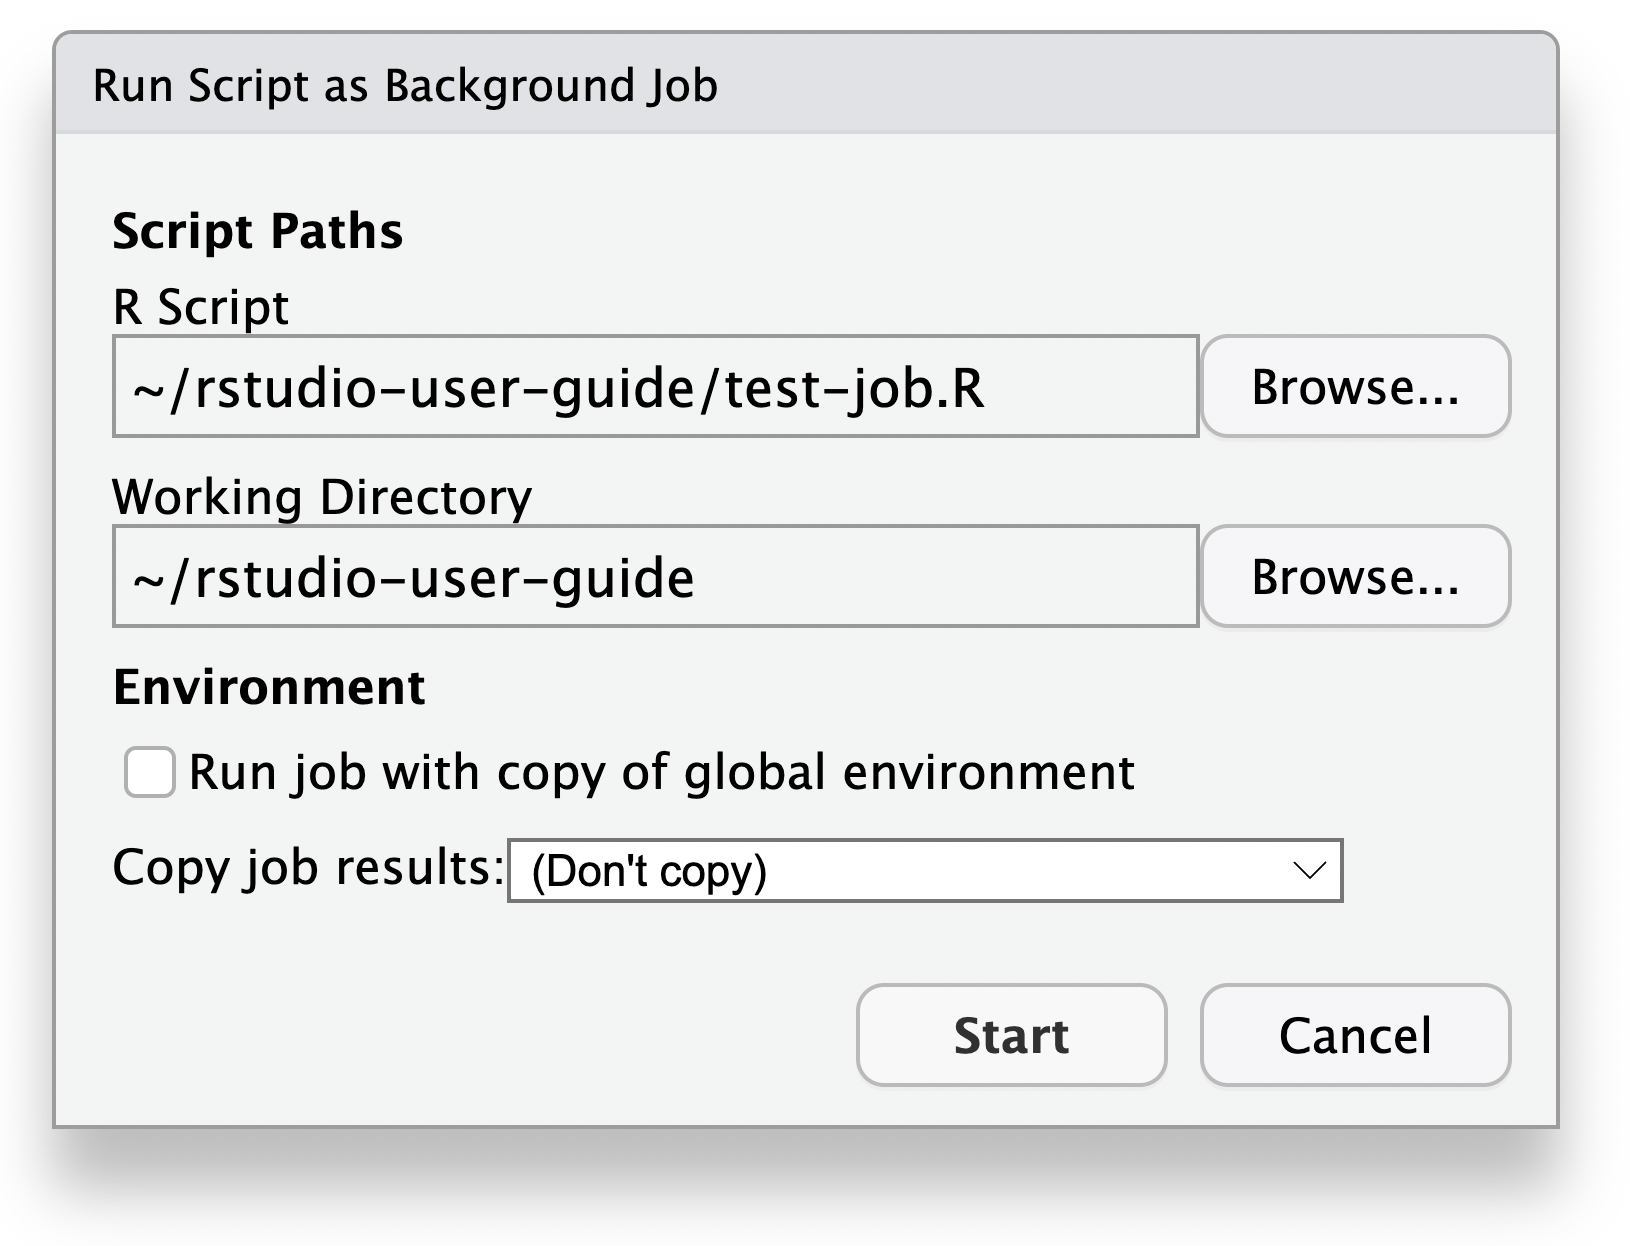 Dialog showing options for starting R script job